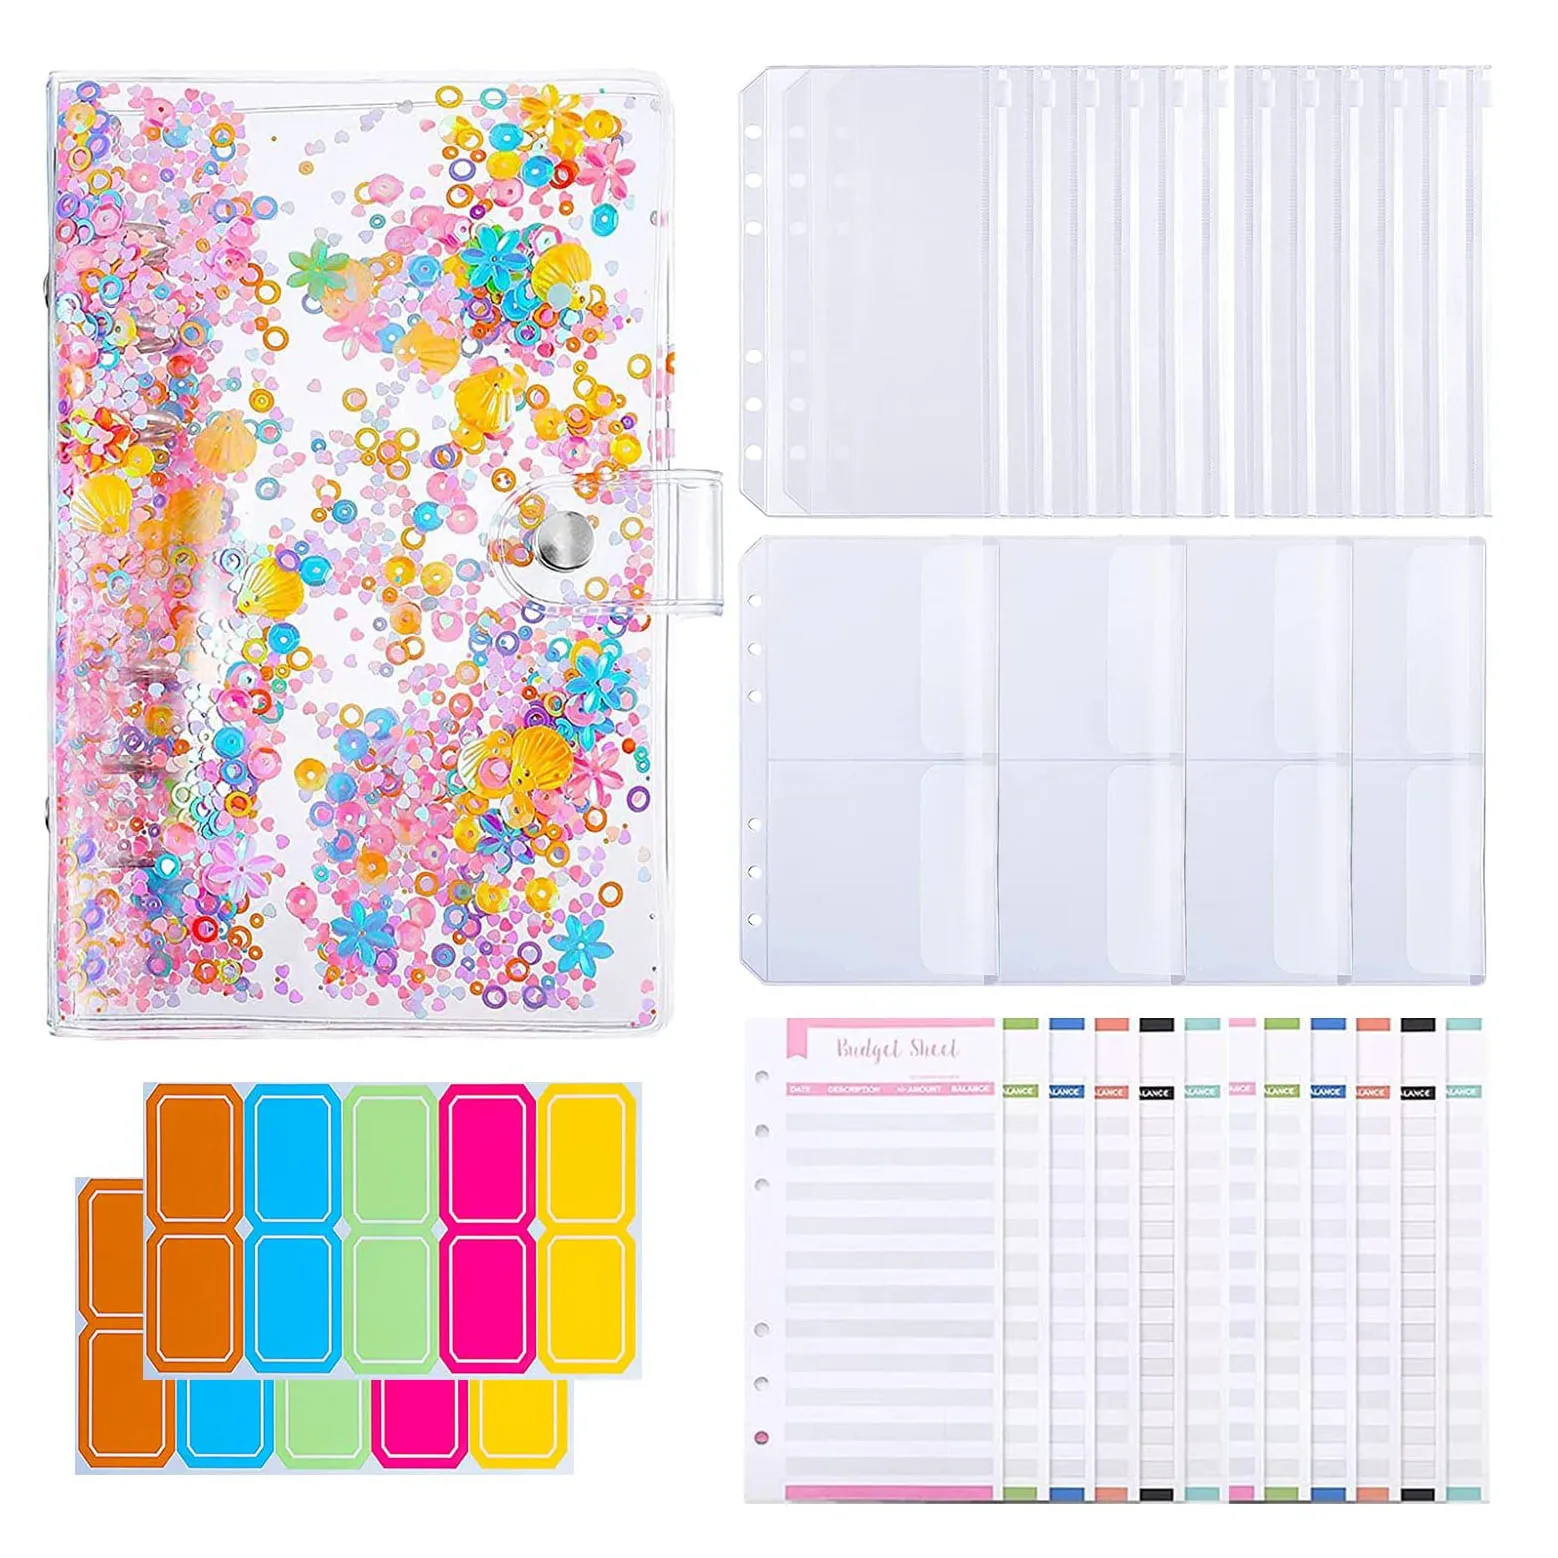 A6 Budget Binder Notebook Planner Organizer with Cash Envelopes Pockets Budget Sheets and Label Stickers for Money Saving Diary a6 budget binder money saving cash envelope planner with 8 binder zipper pockets 12 expense budget sheets and 2 label stickers